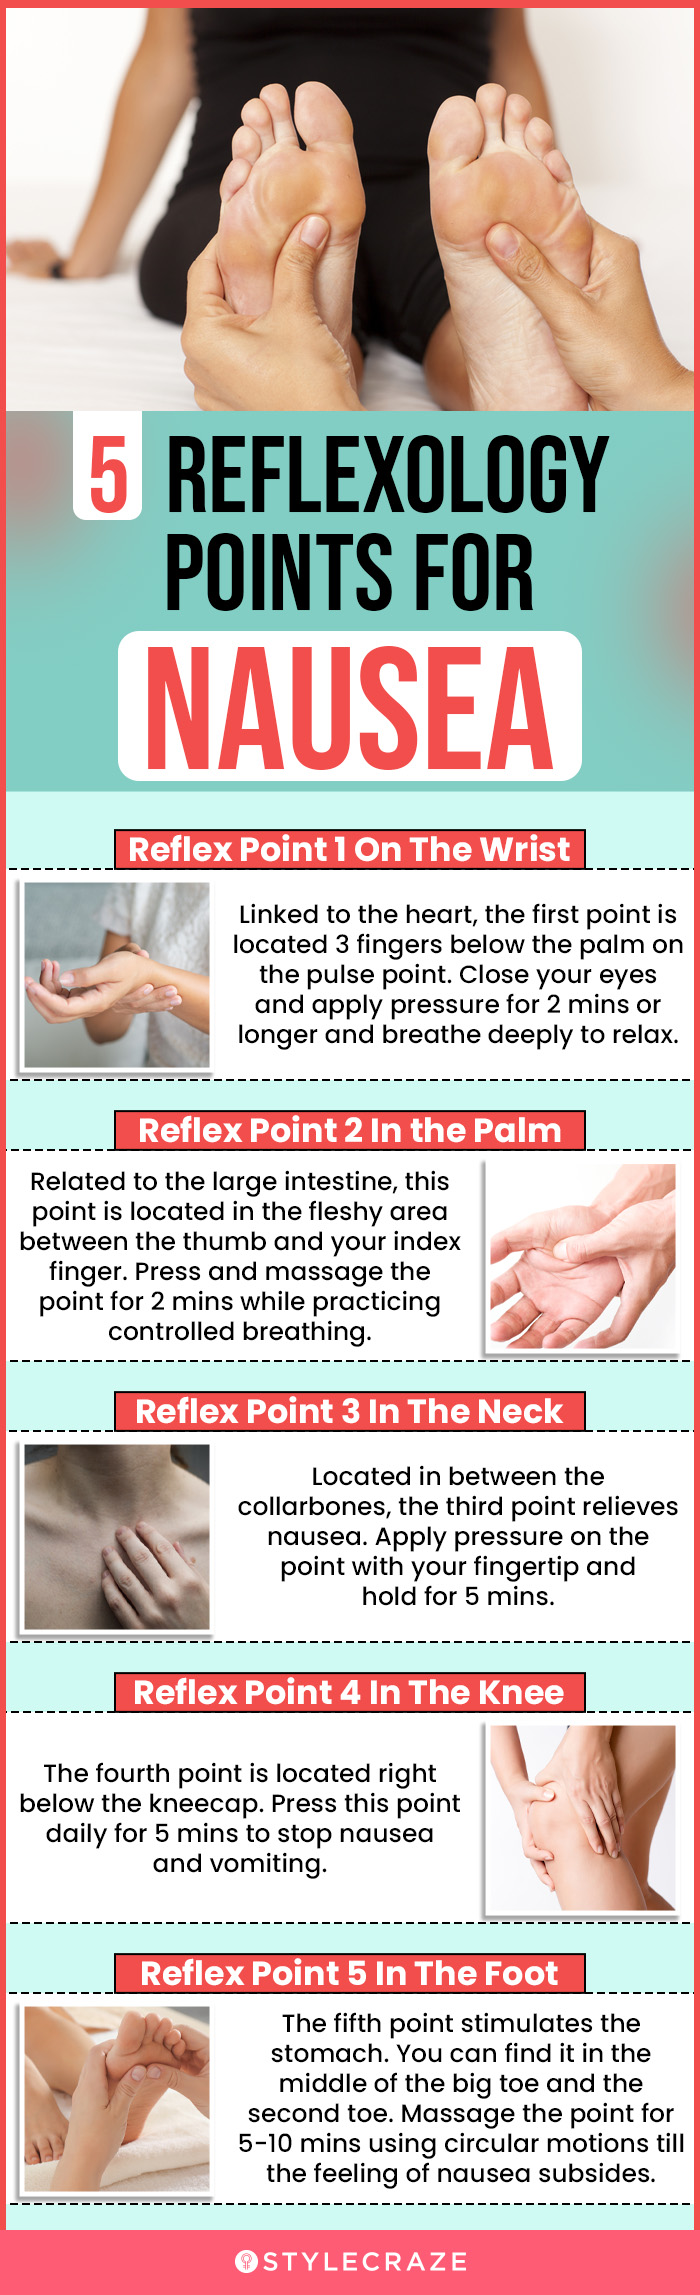 5 reflexology points for curing nausea (infographic)